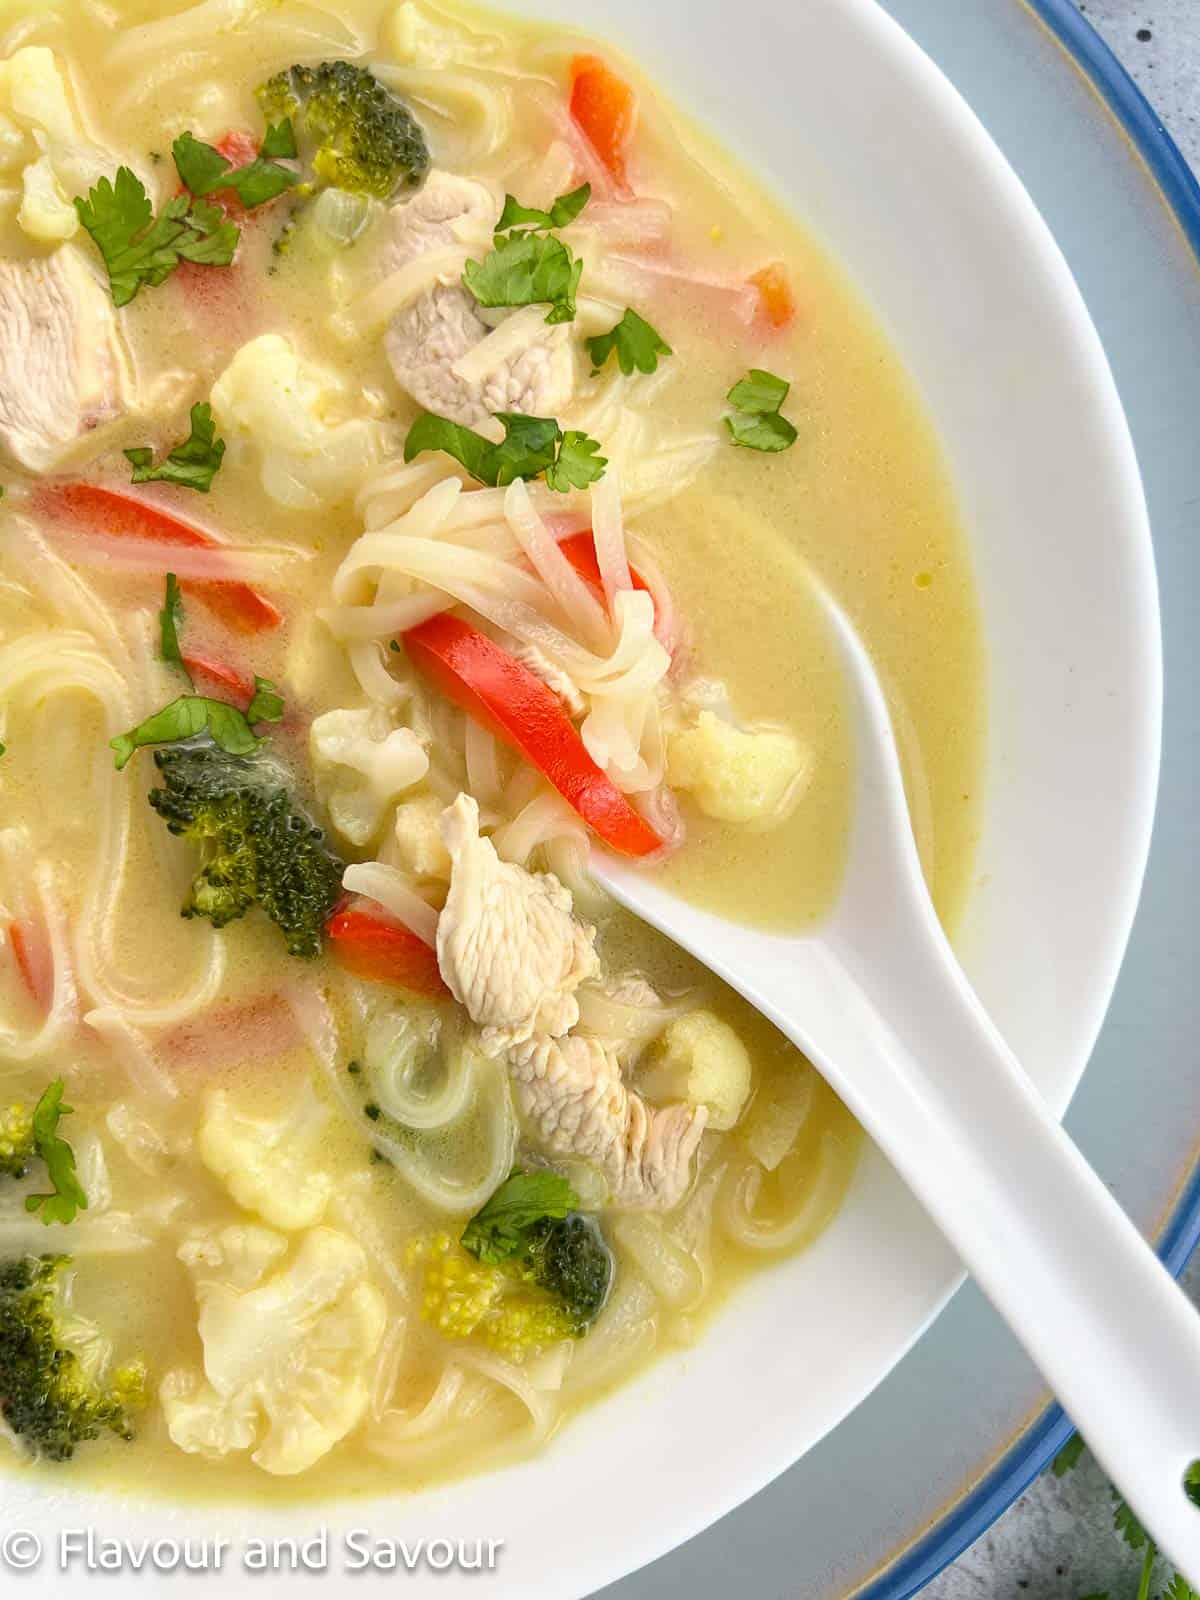 A bowl of Thai green curry chicken soup with a ceramic spoon.